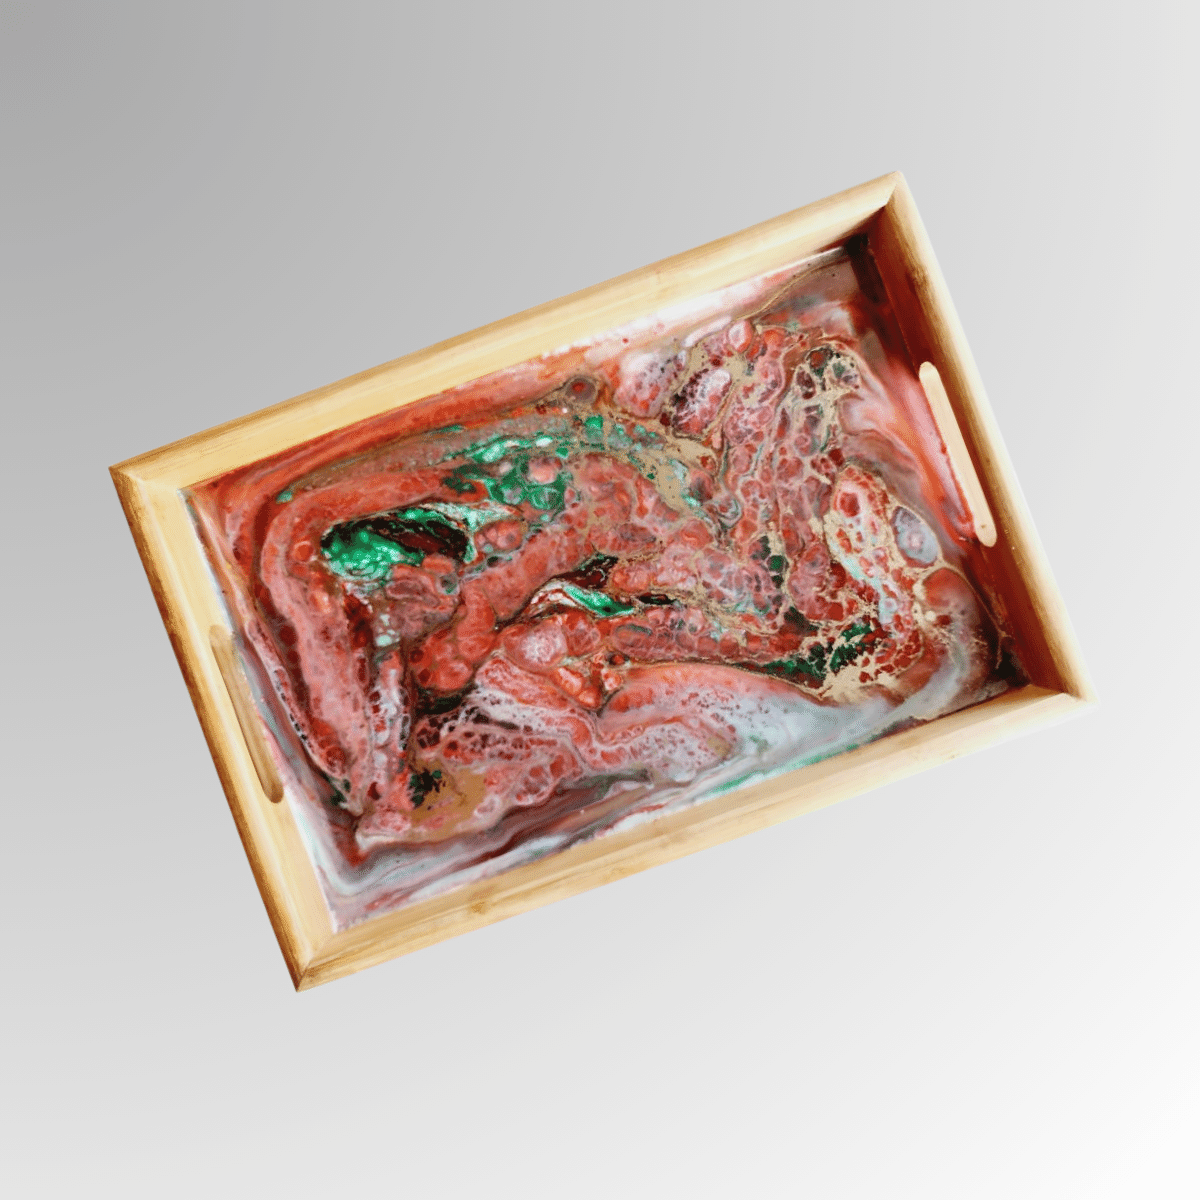 Decorative Wooden Tray With Resin Art